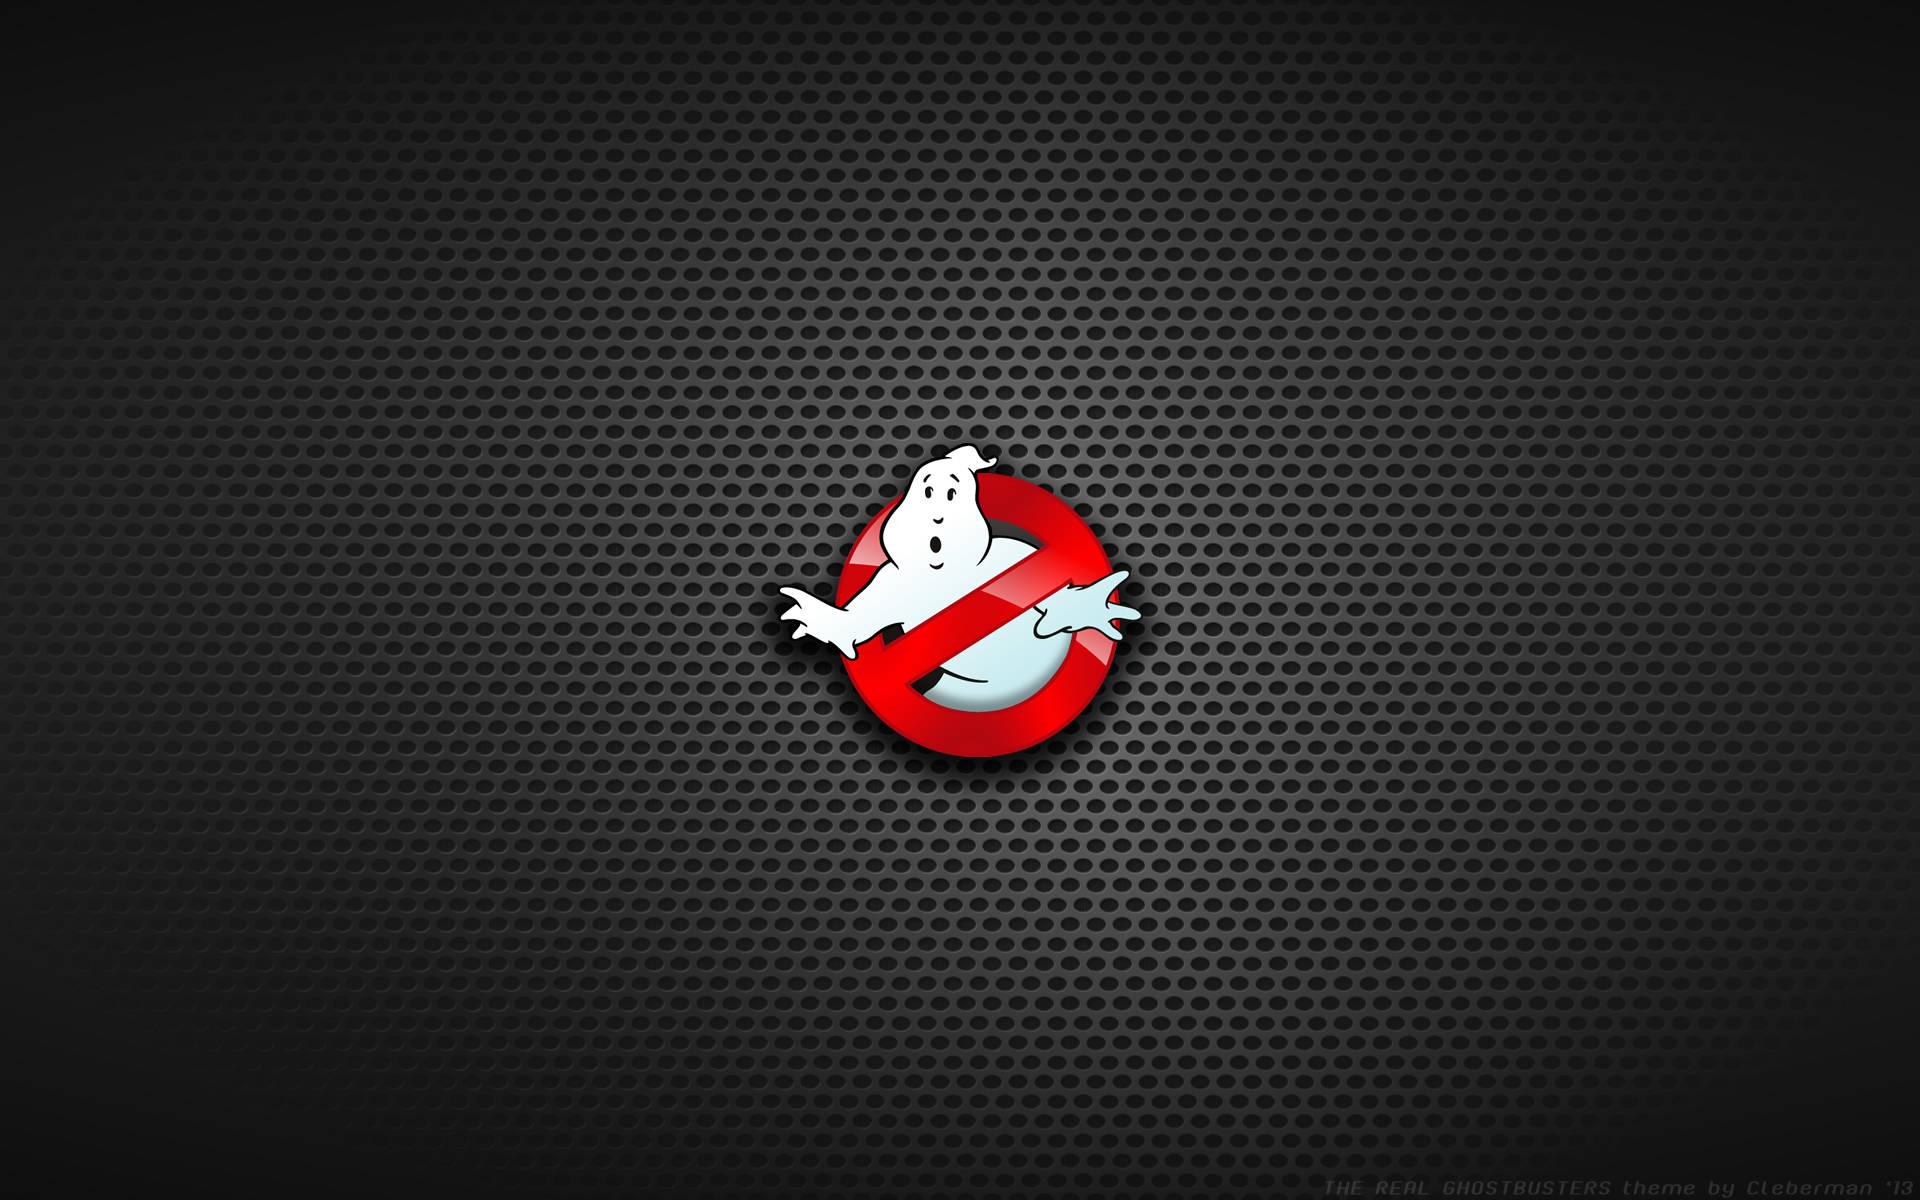 Ghostbusters Dotted Logo Wallpaper